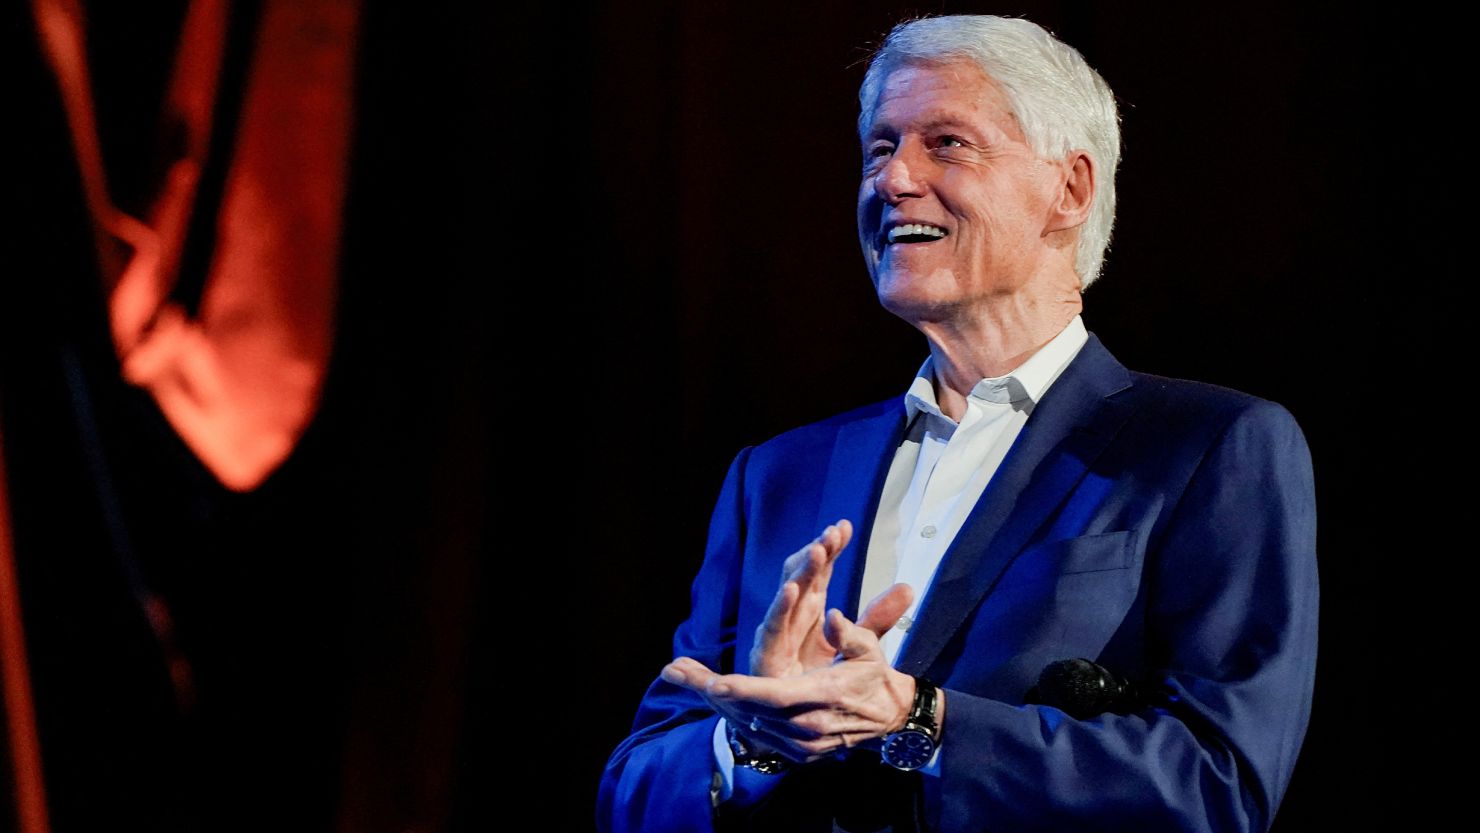 Former President Bill Clinton participates in a discussion moderated by Stephen Colbert, host of CBS's "The Late Show with Stephen Colbert," during a campaign fundraising event at Radio City Music Hall in New York, on March 28.